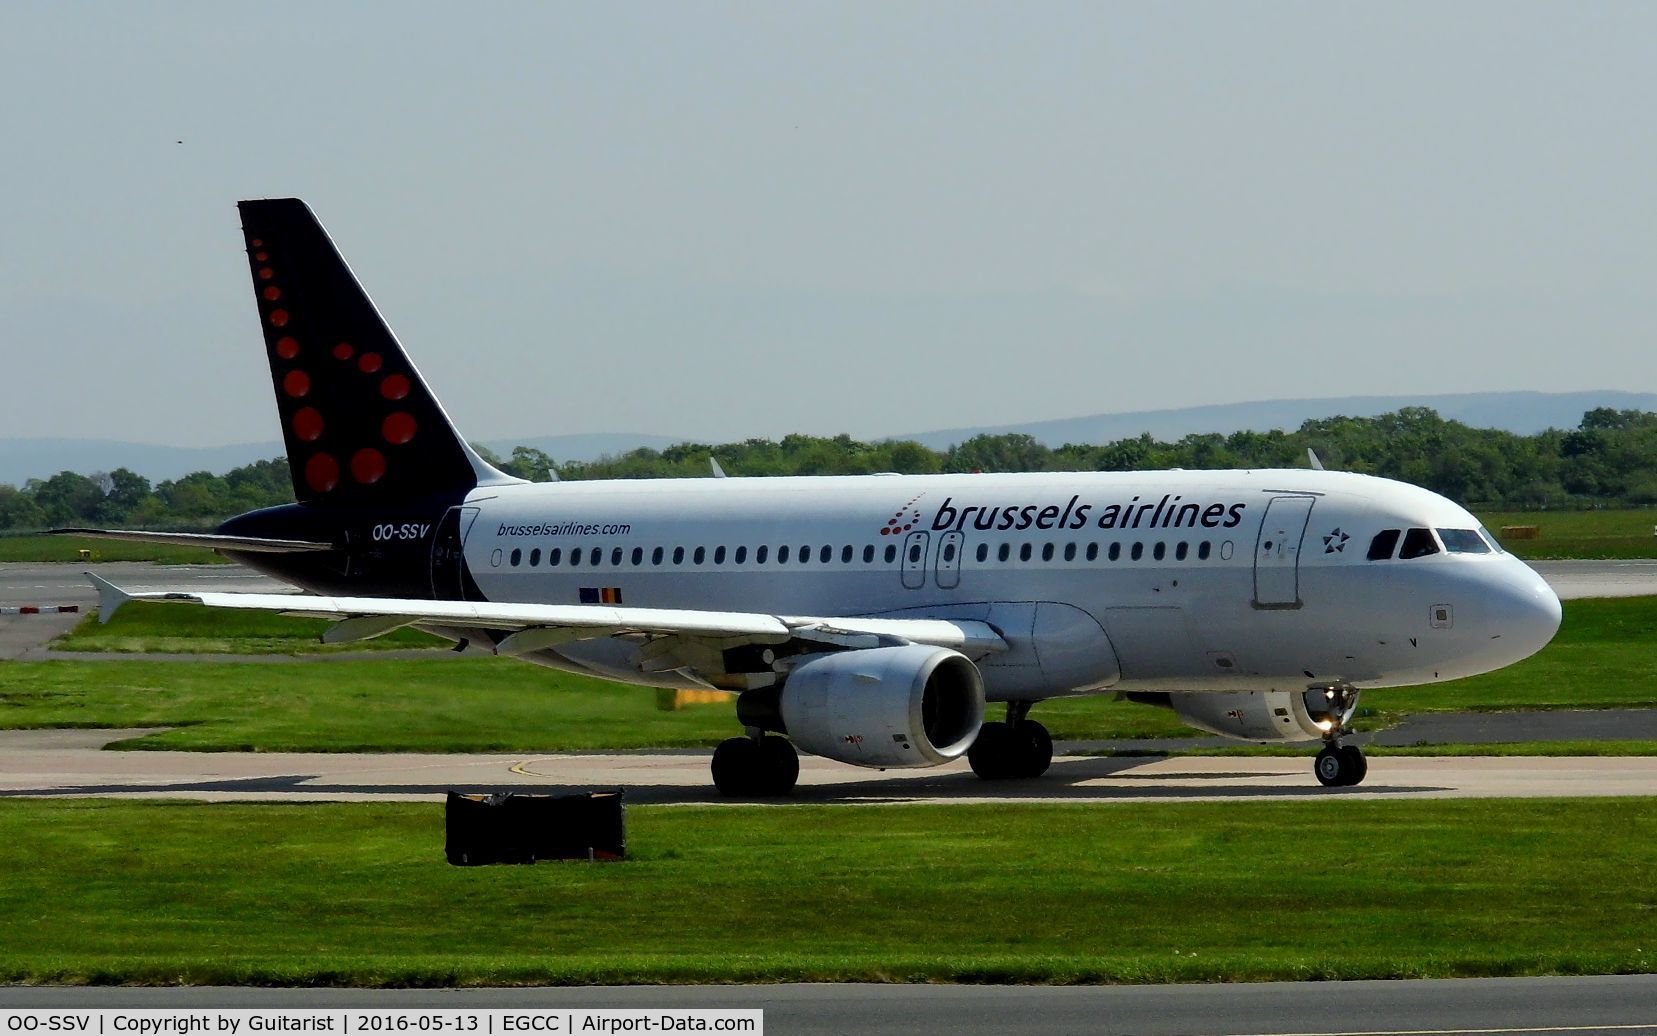 OO-SSV, 2004 Airbus A319-111 C/N 2196, At Manchester